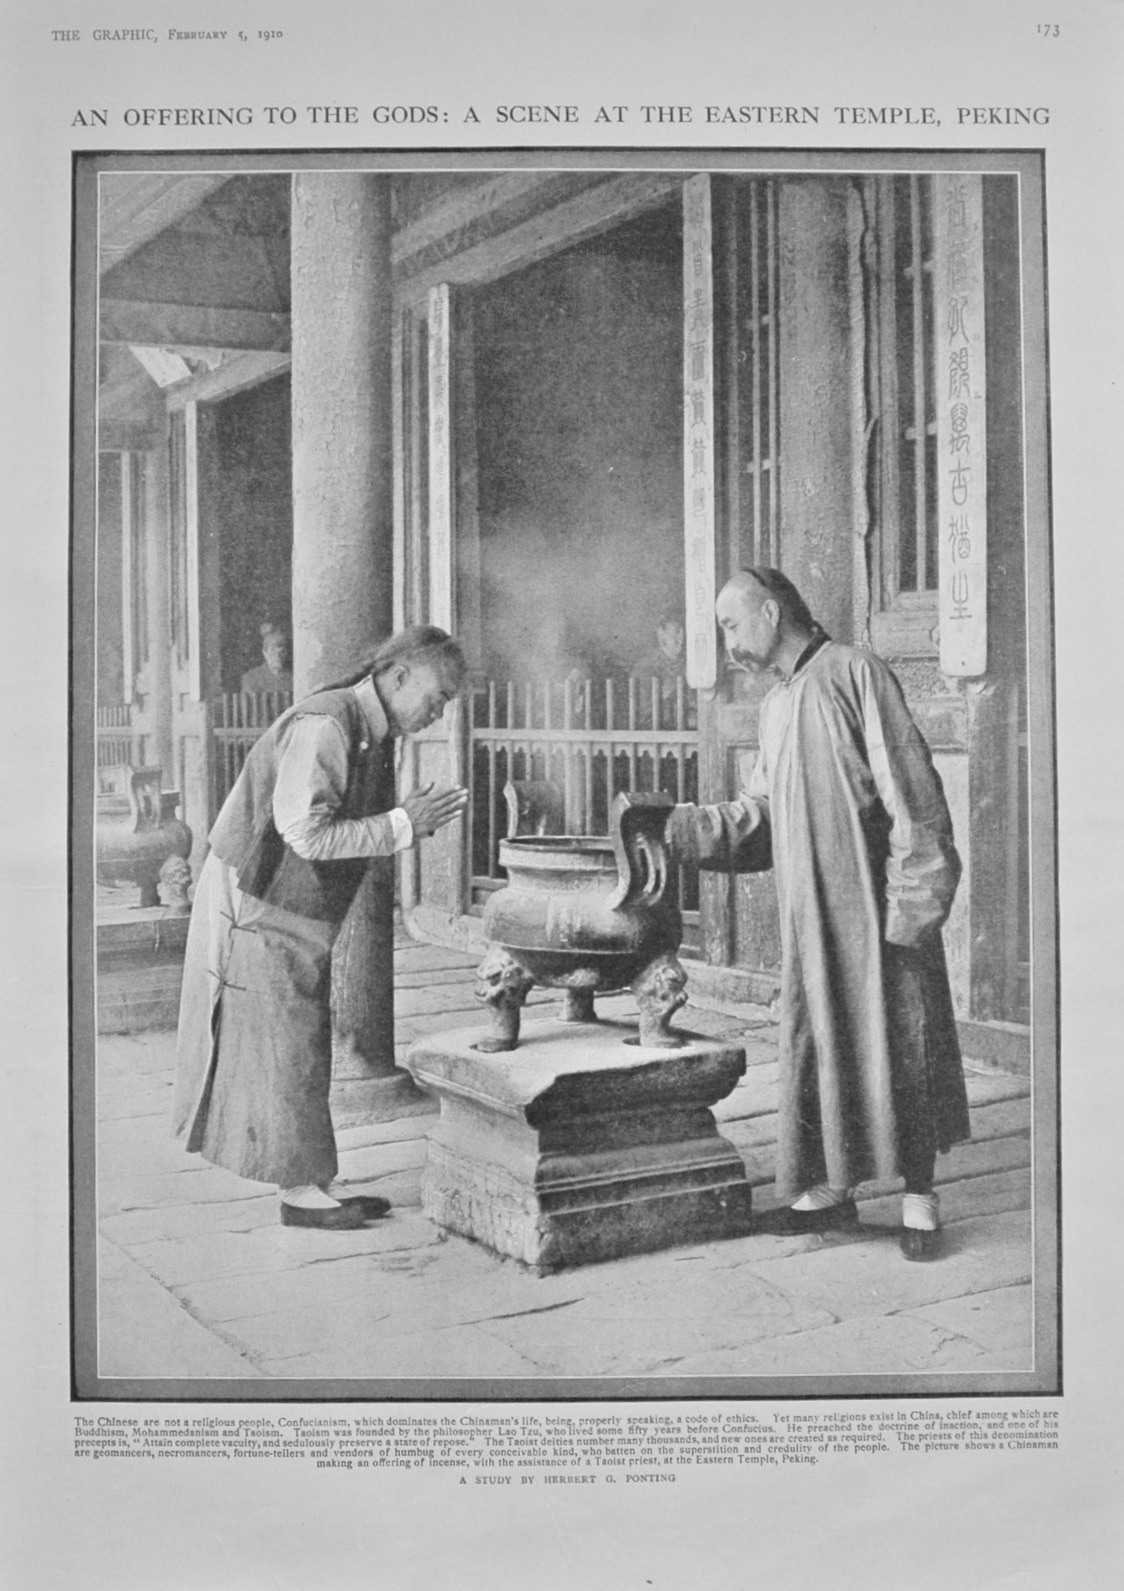 A Scene at the Eastern Temple, Peking - 1910